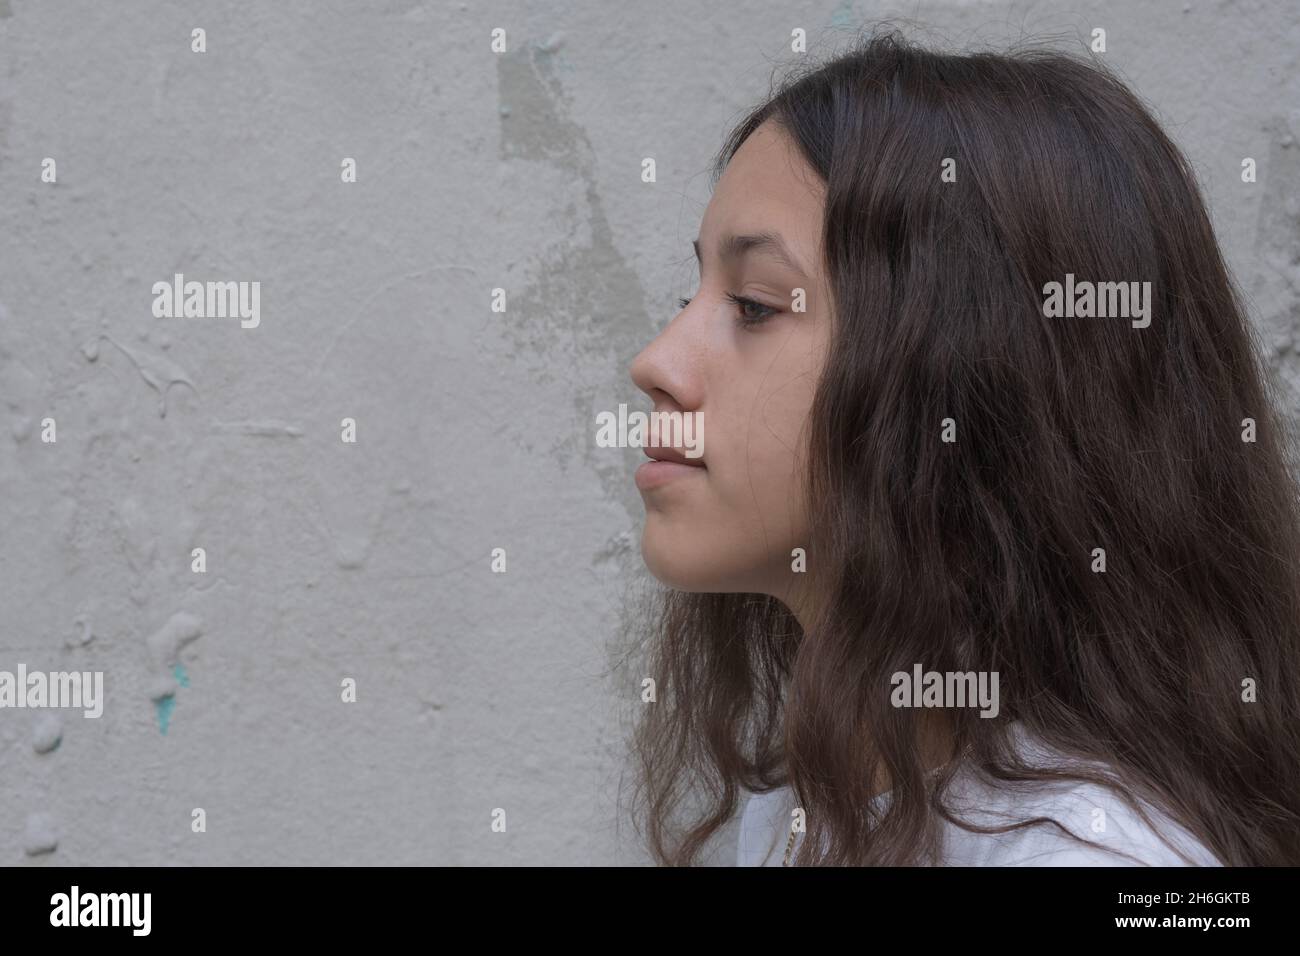 Close up profile of a teenage girl with long brown hair looks forward with a thoughtful expression. Background of gray wall, copy free space for text. Stock Photo